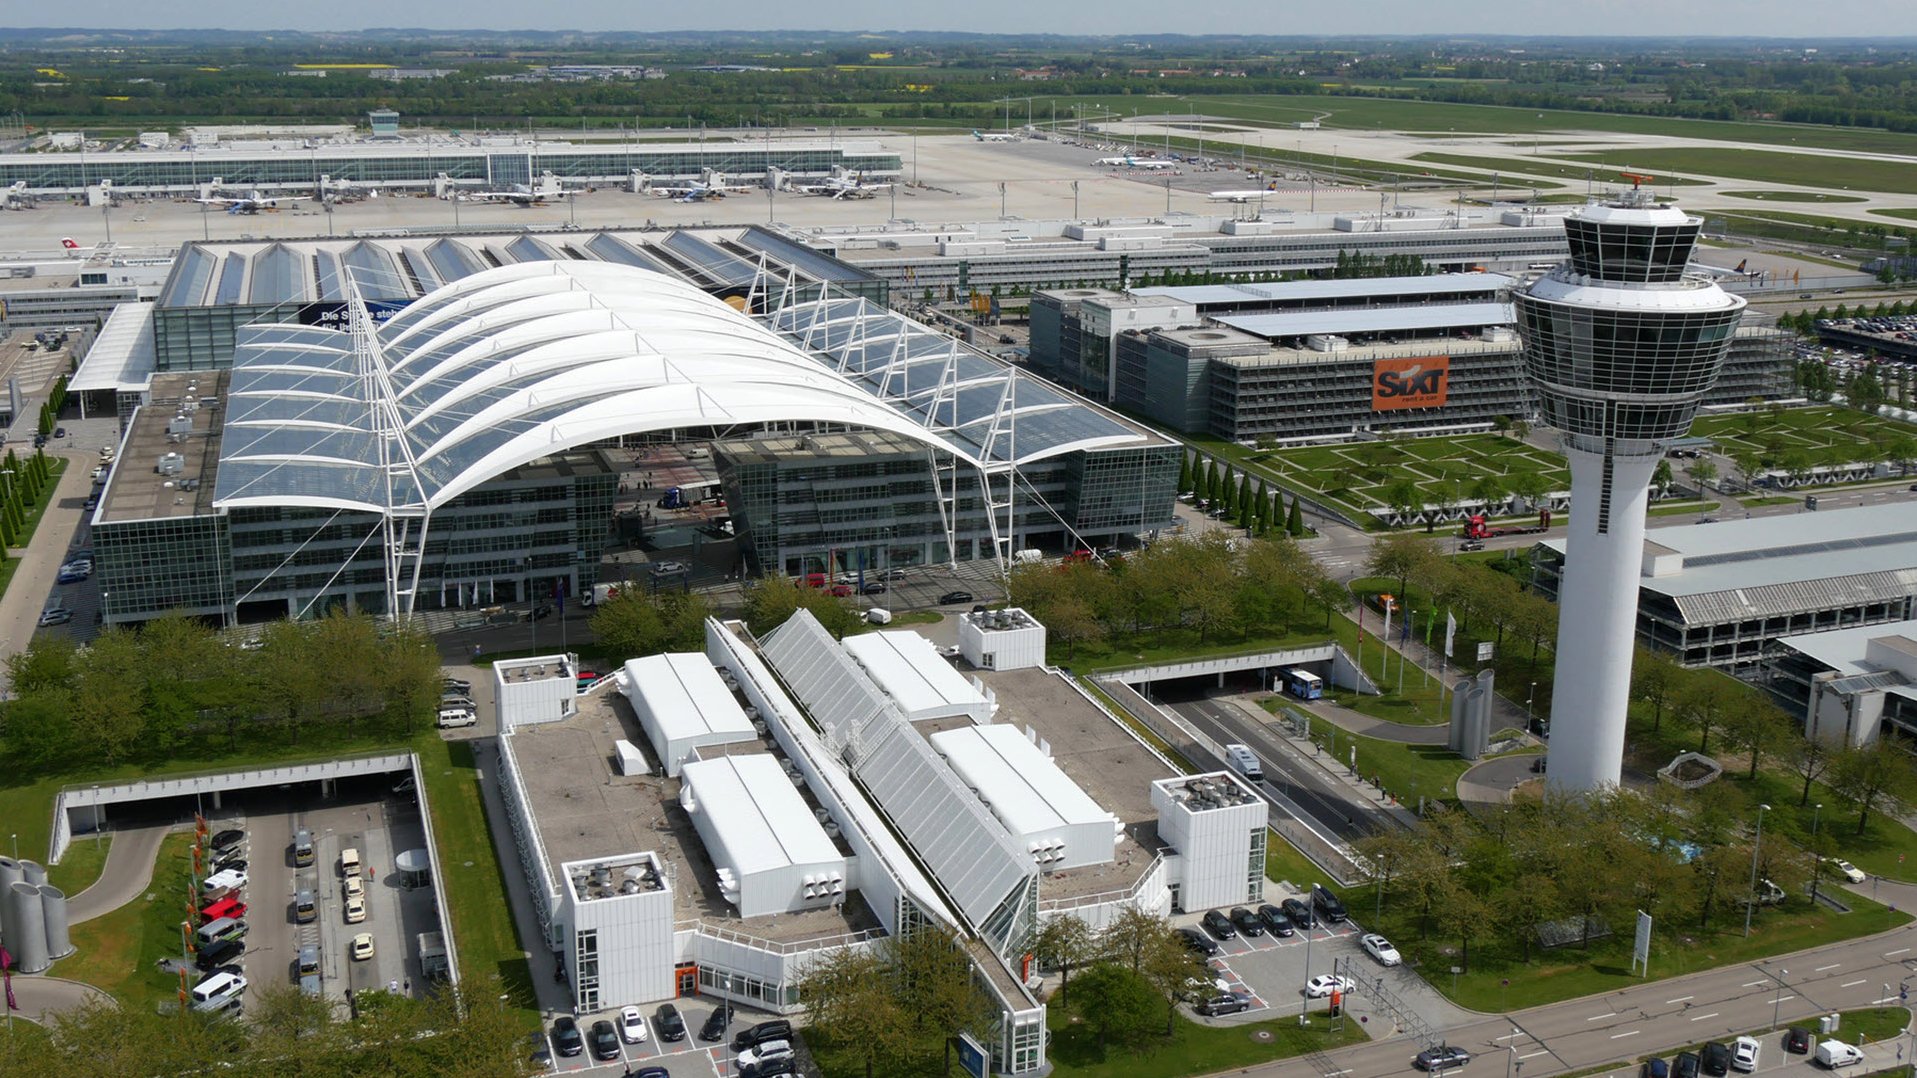 Munich Airport Center and central building in Munich, Germany 